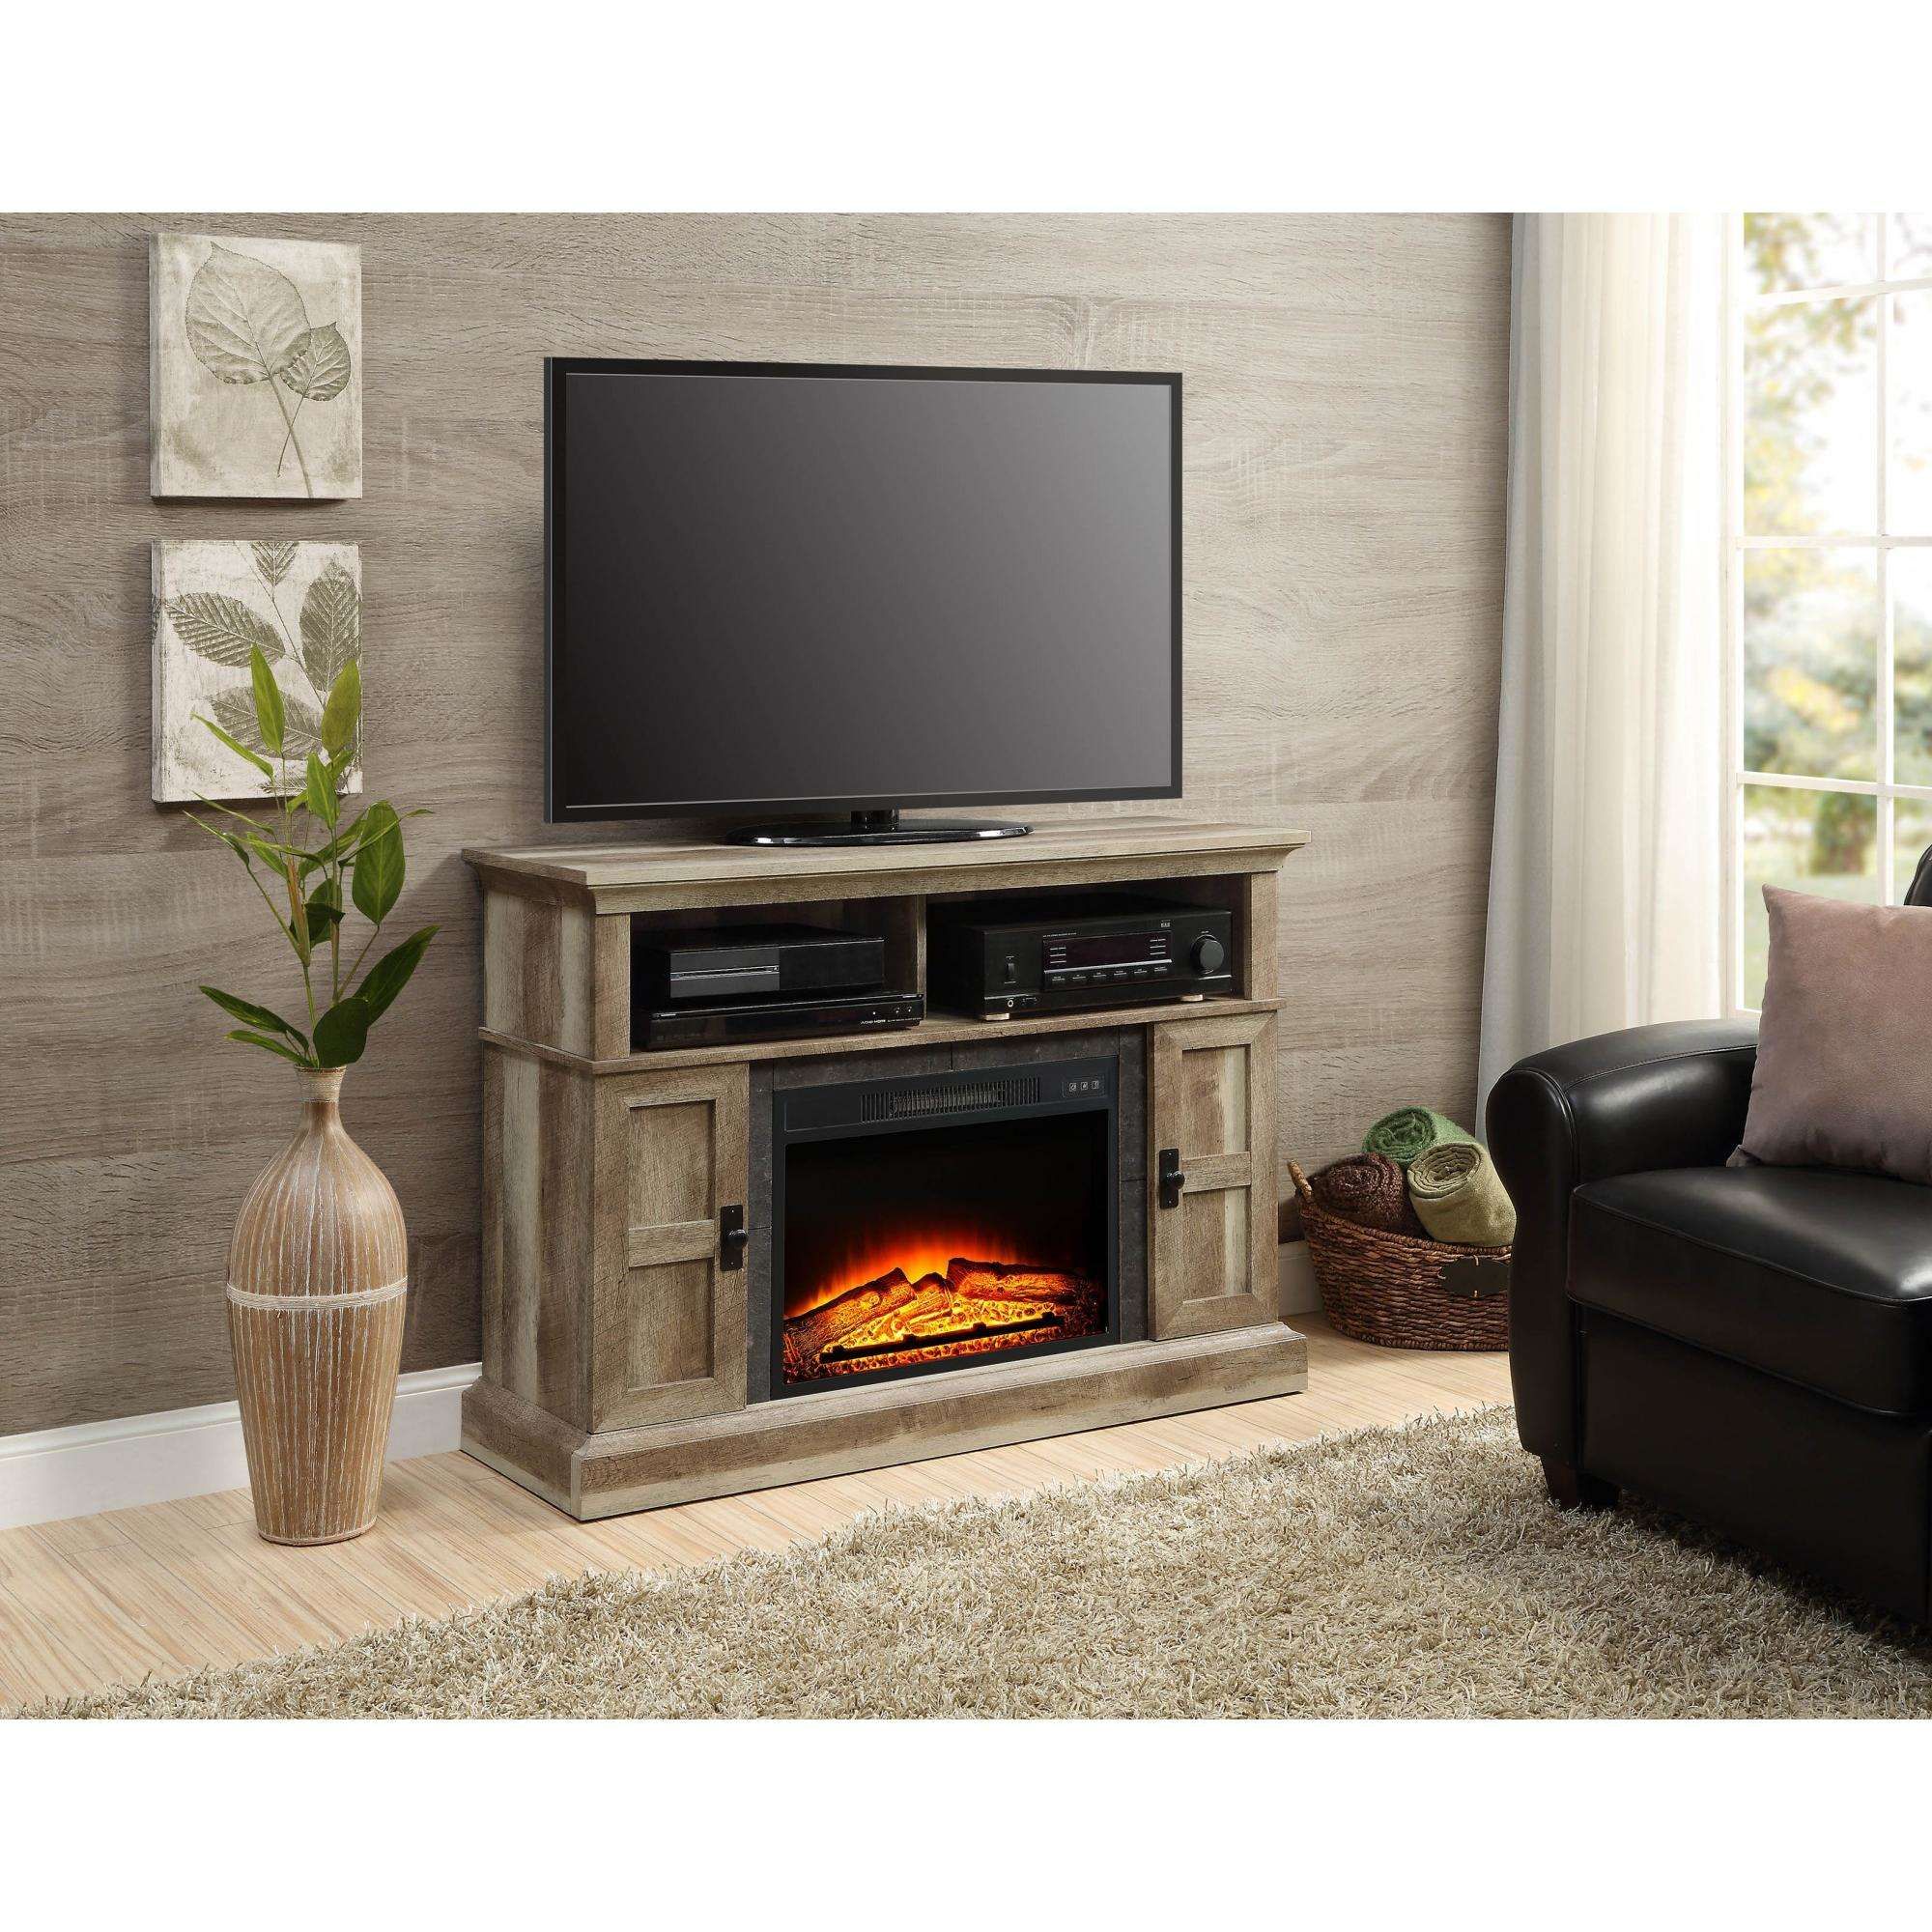 Floating Entertainment Center with Fireplace Lovely Whalen Media Fireplace for Your Home Television Stand Fits